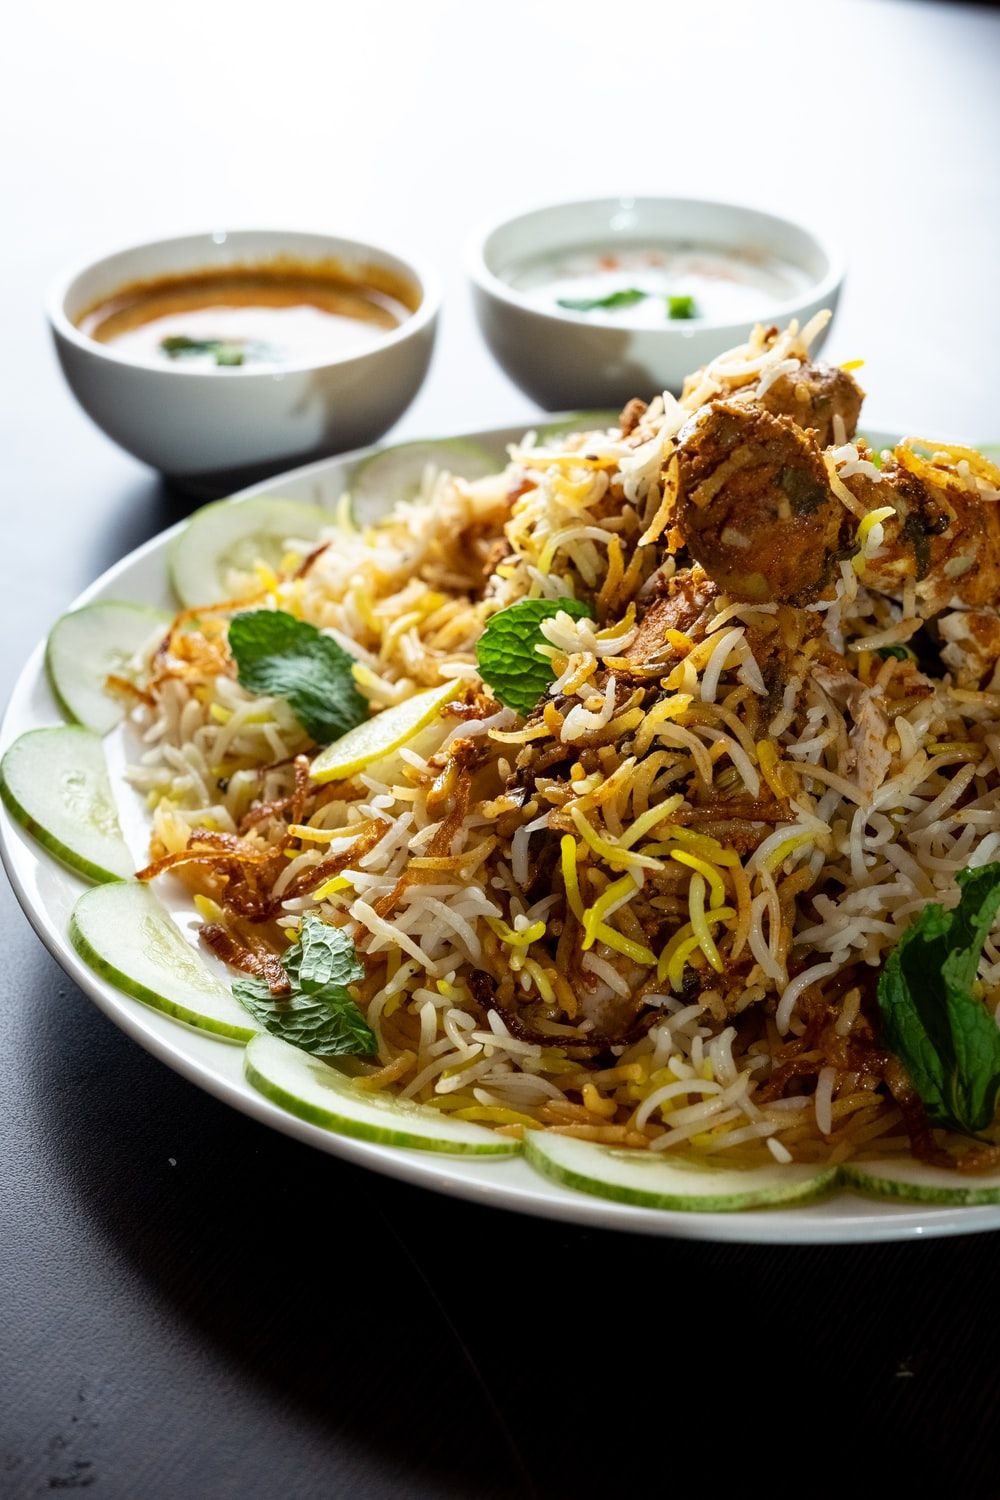 [HQ] Indian Food Picture. Download Free Image